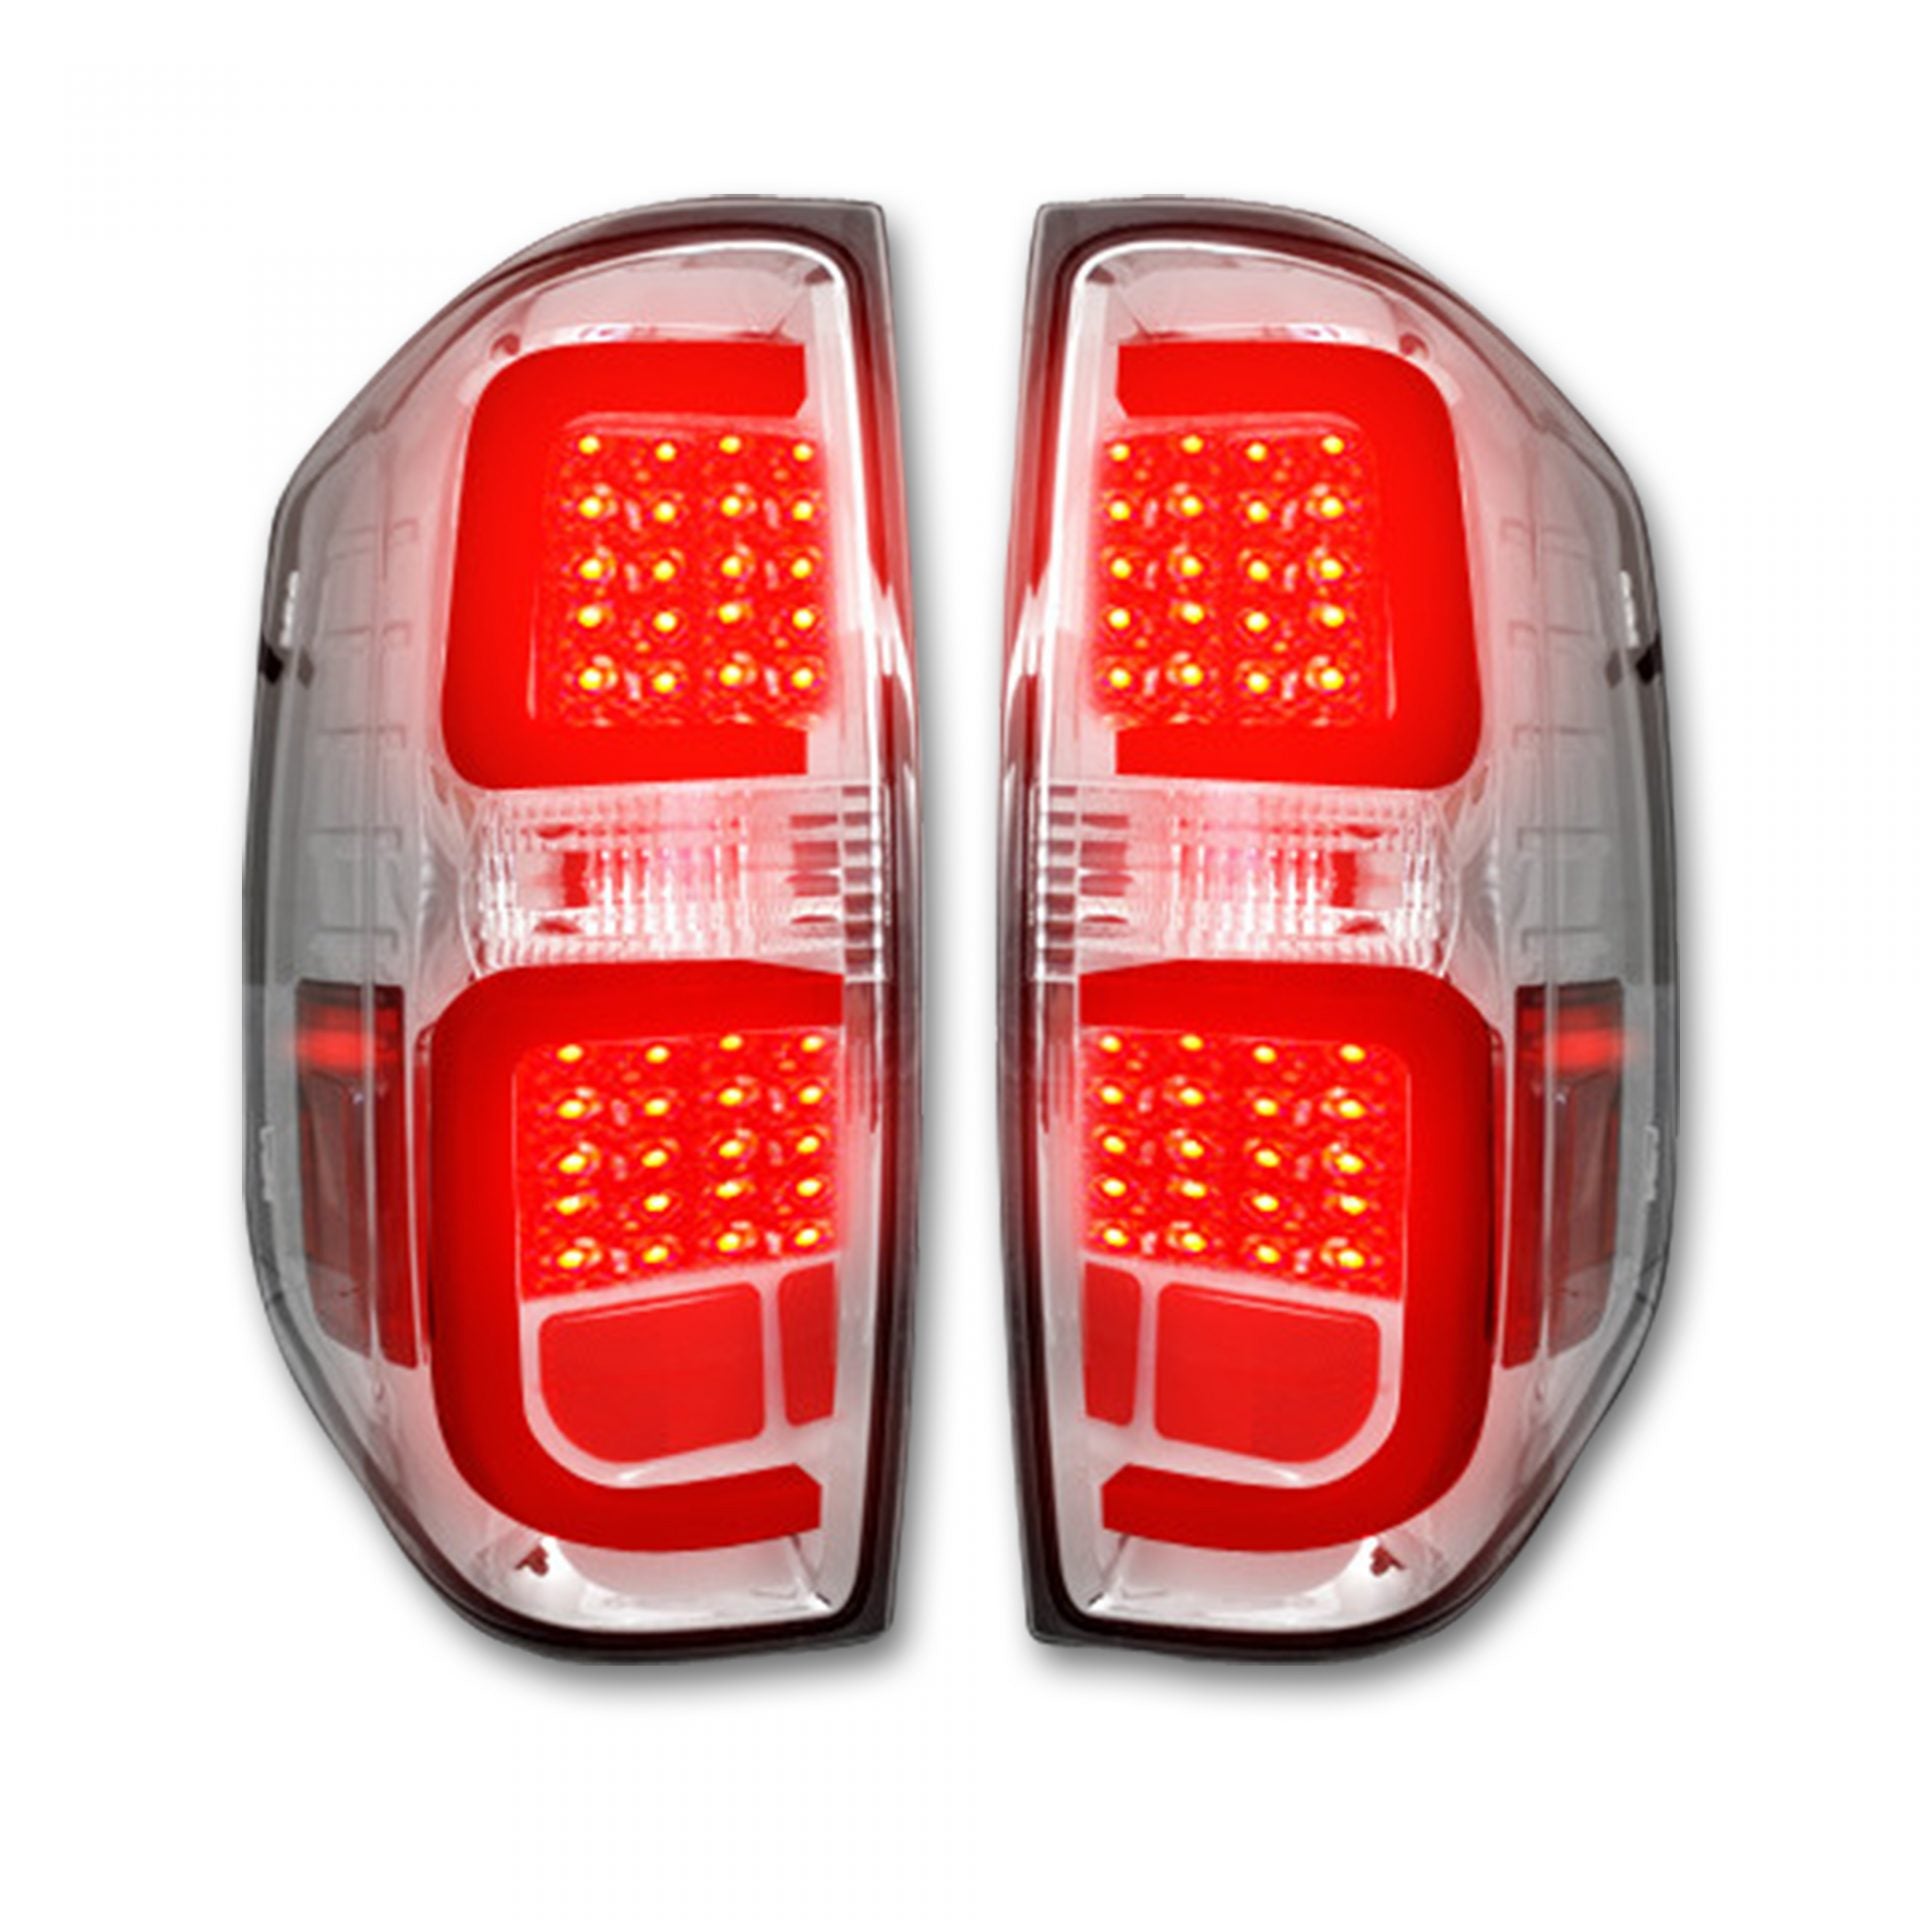 Toyota Tundra 14-19 LED Taillights - Clear Lens